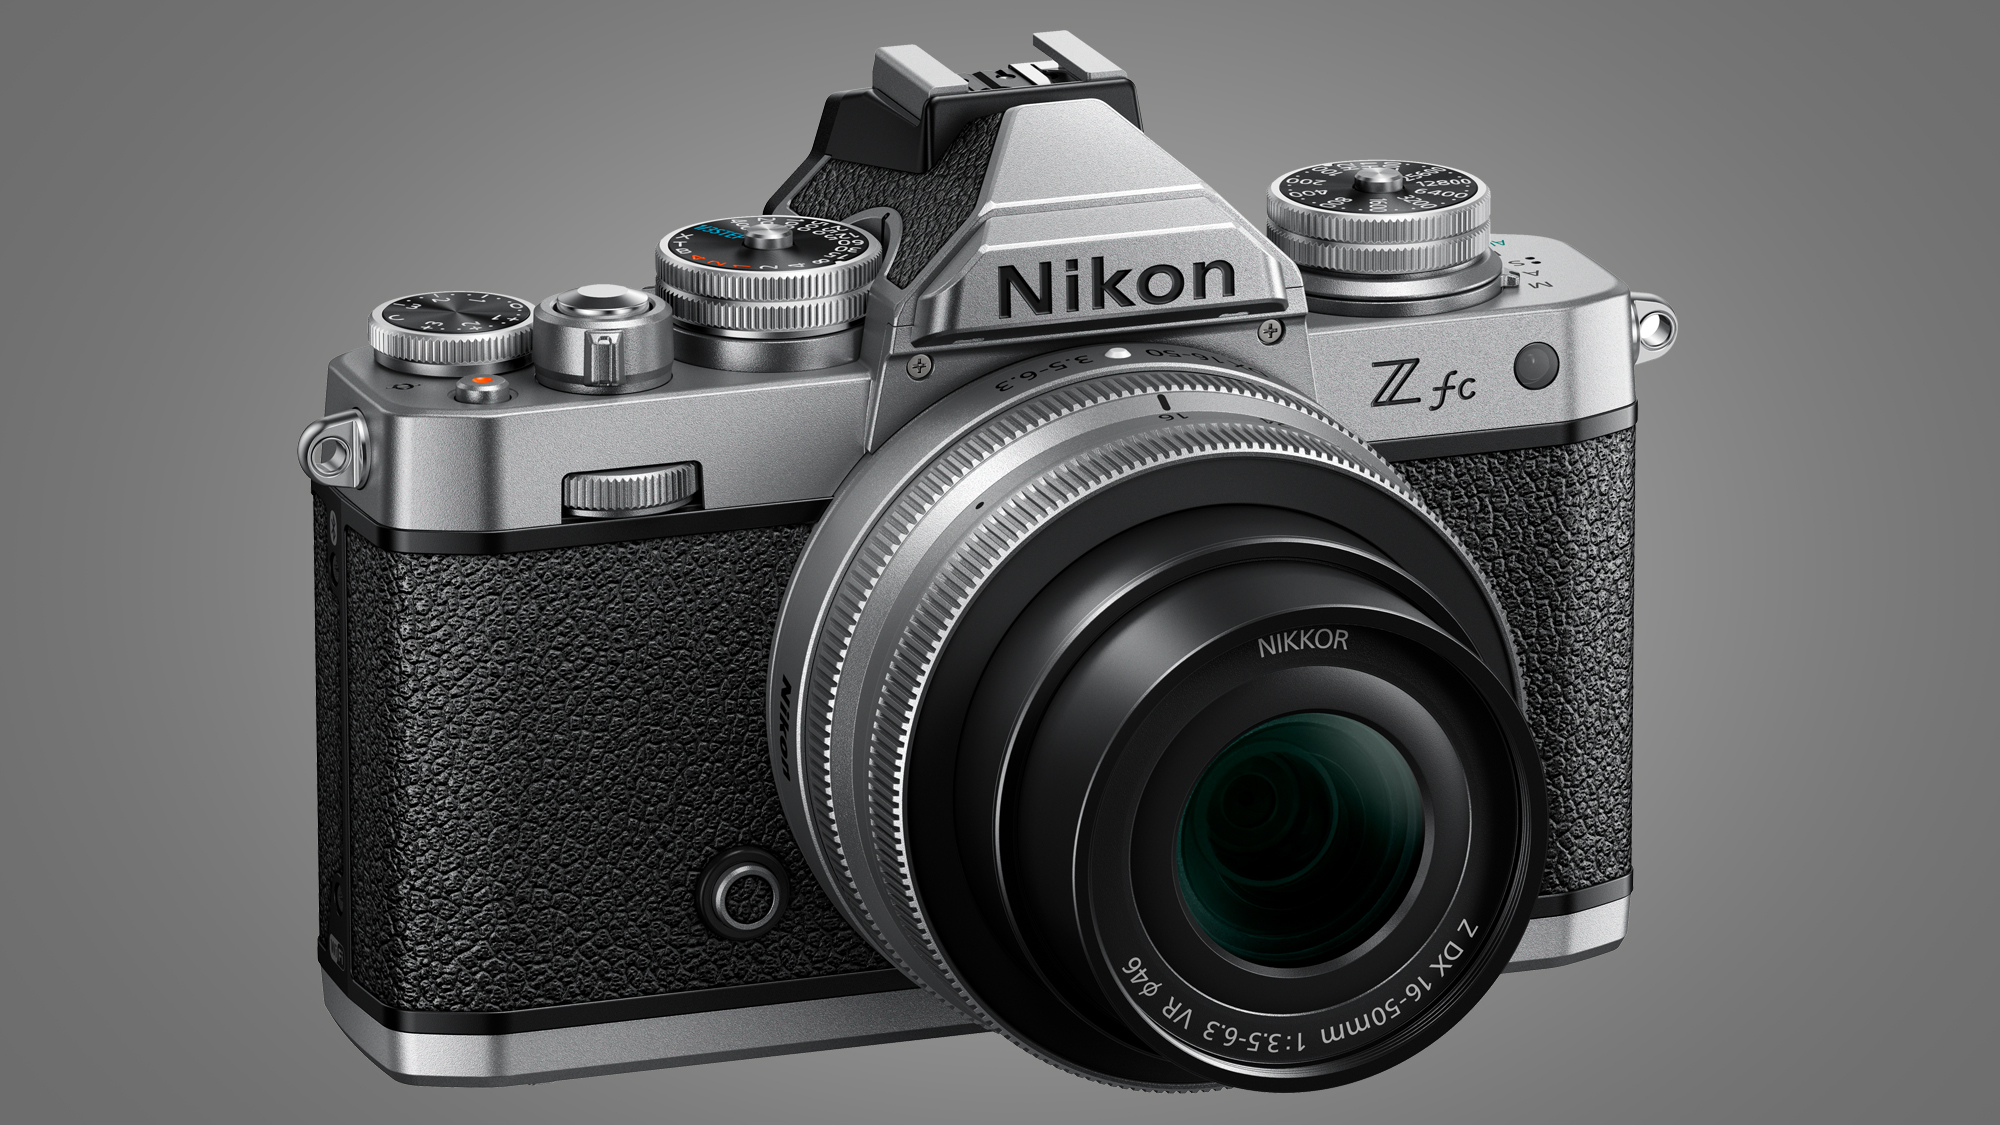 Image of the Nikon Zfc with silver version of Nikkor Z DX 16-50mm f/3.5-6.3 VR